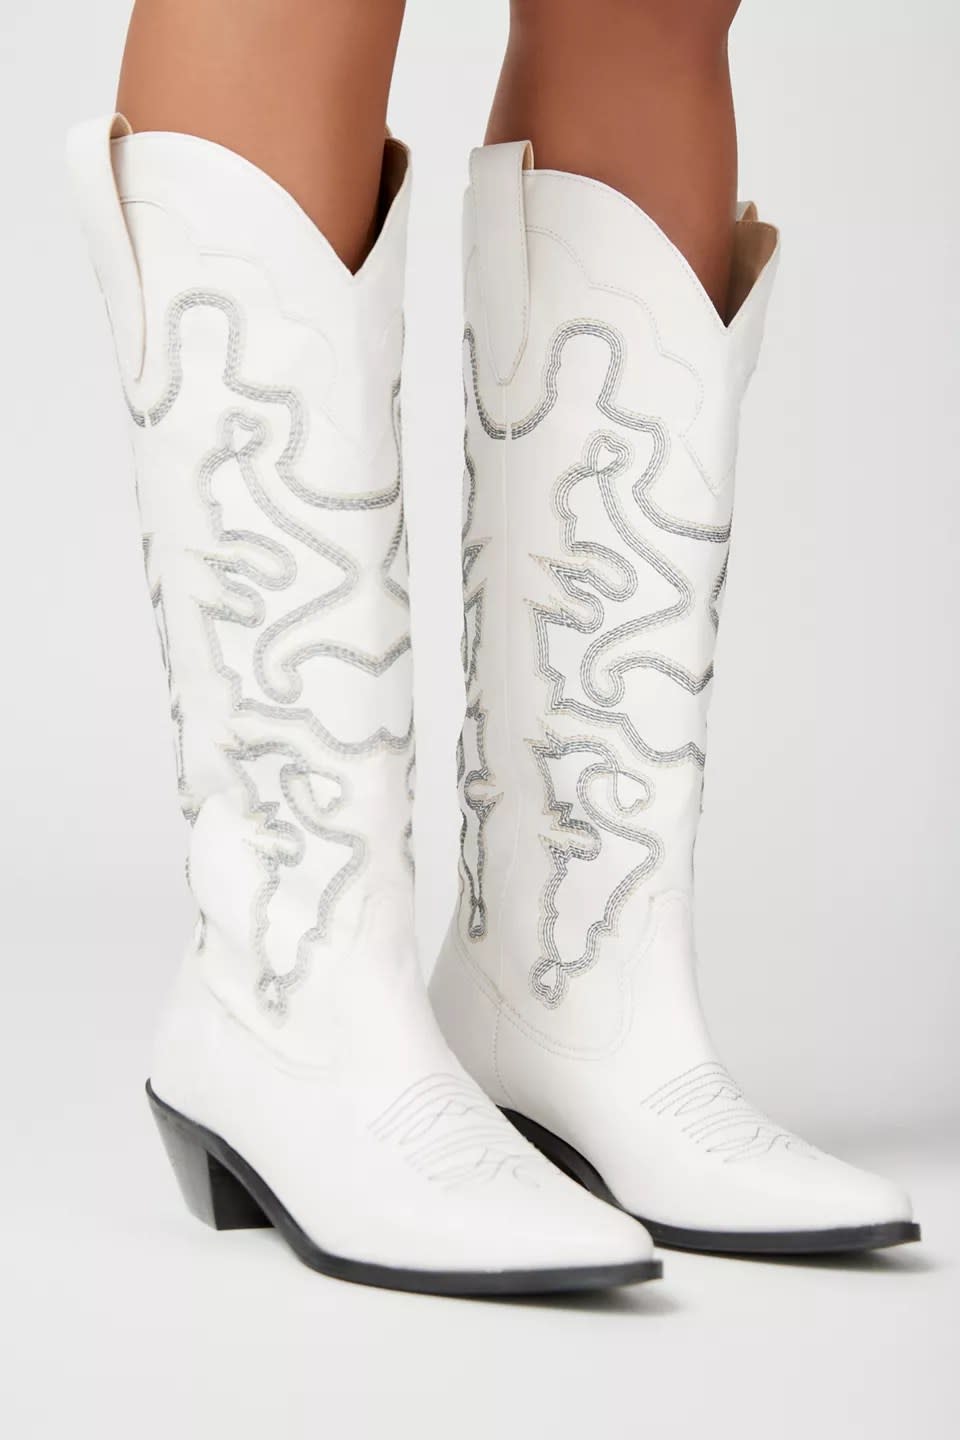 model wearing tall white and silver cowboy boots